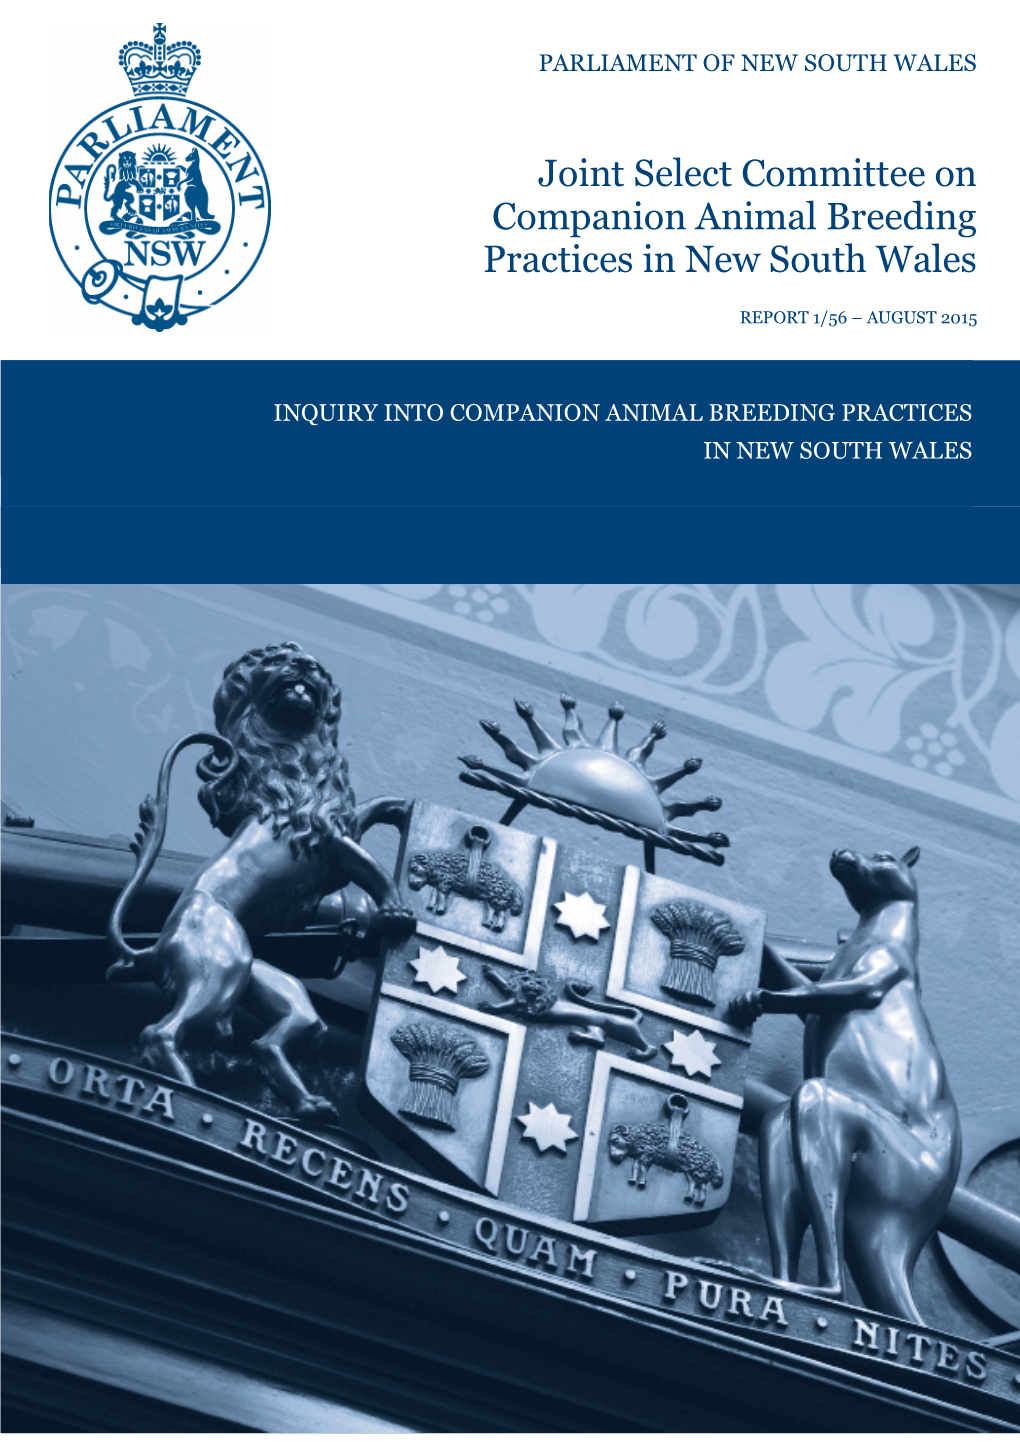 Joint Select Committee on Companion Animal Breeding Practices in New South Wales